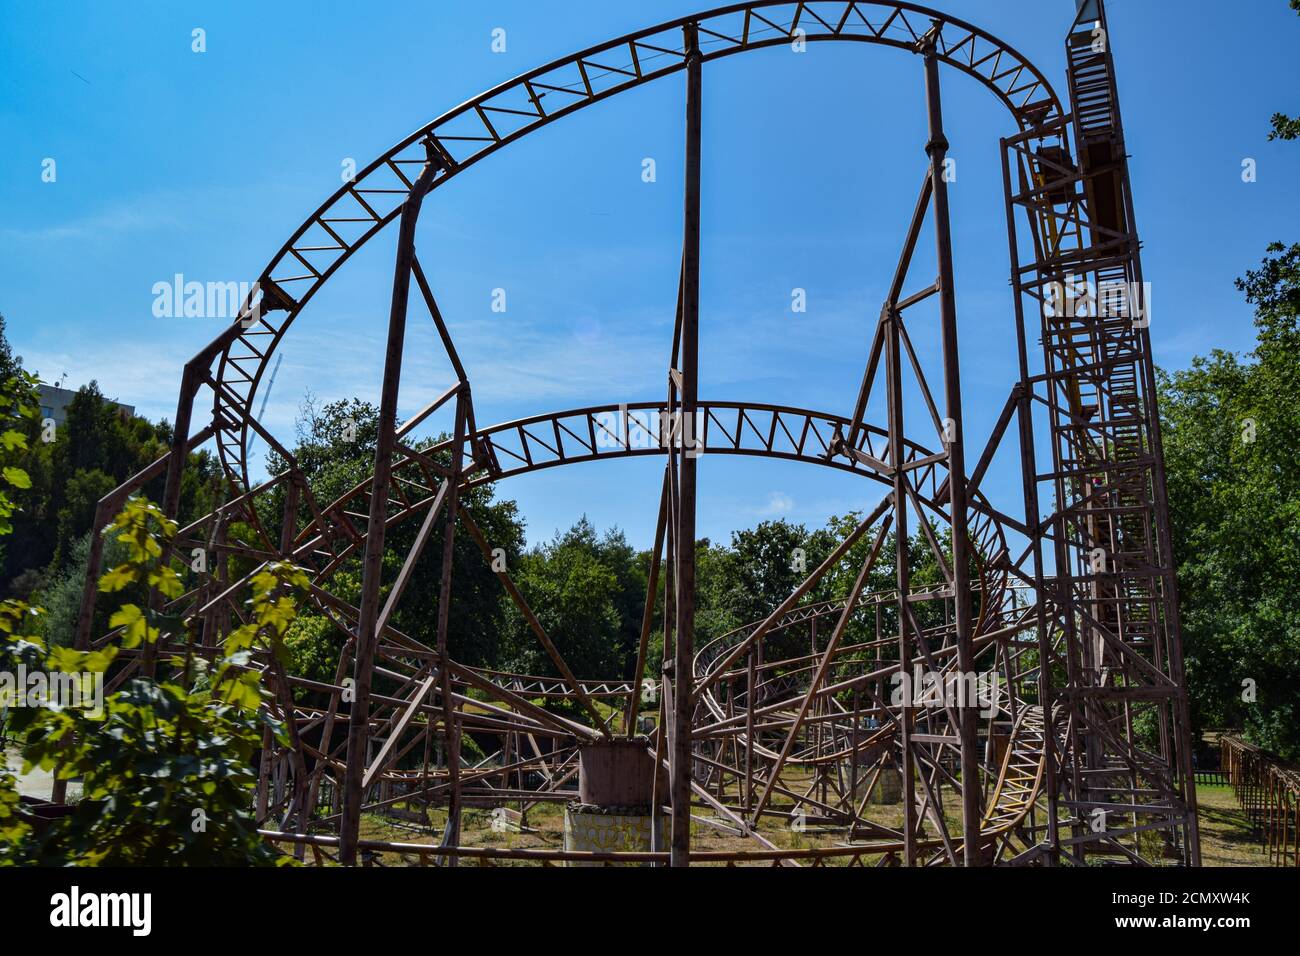 Rollercoaster structure Stock Photo